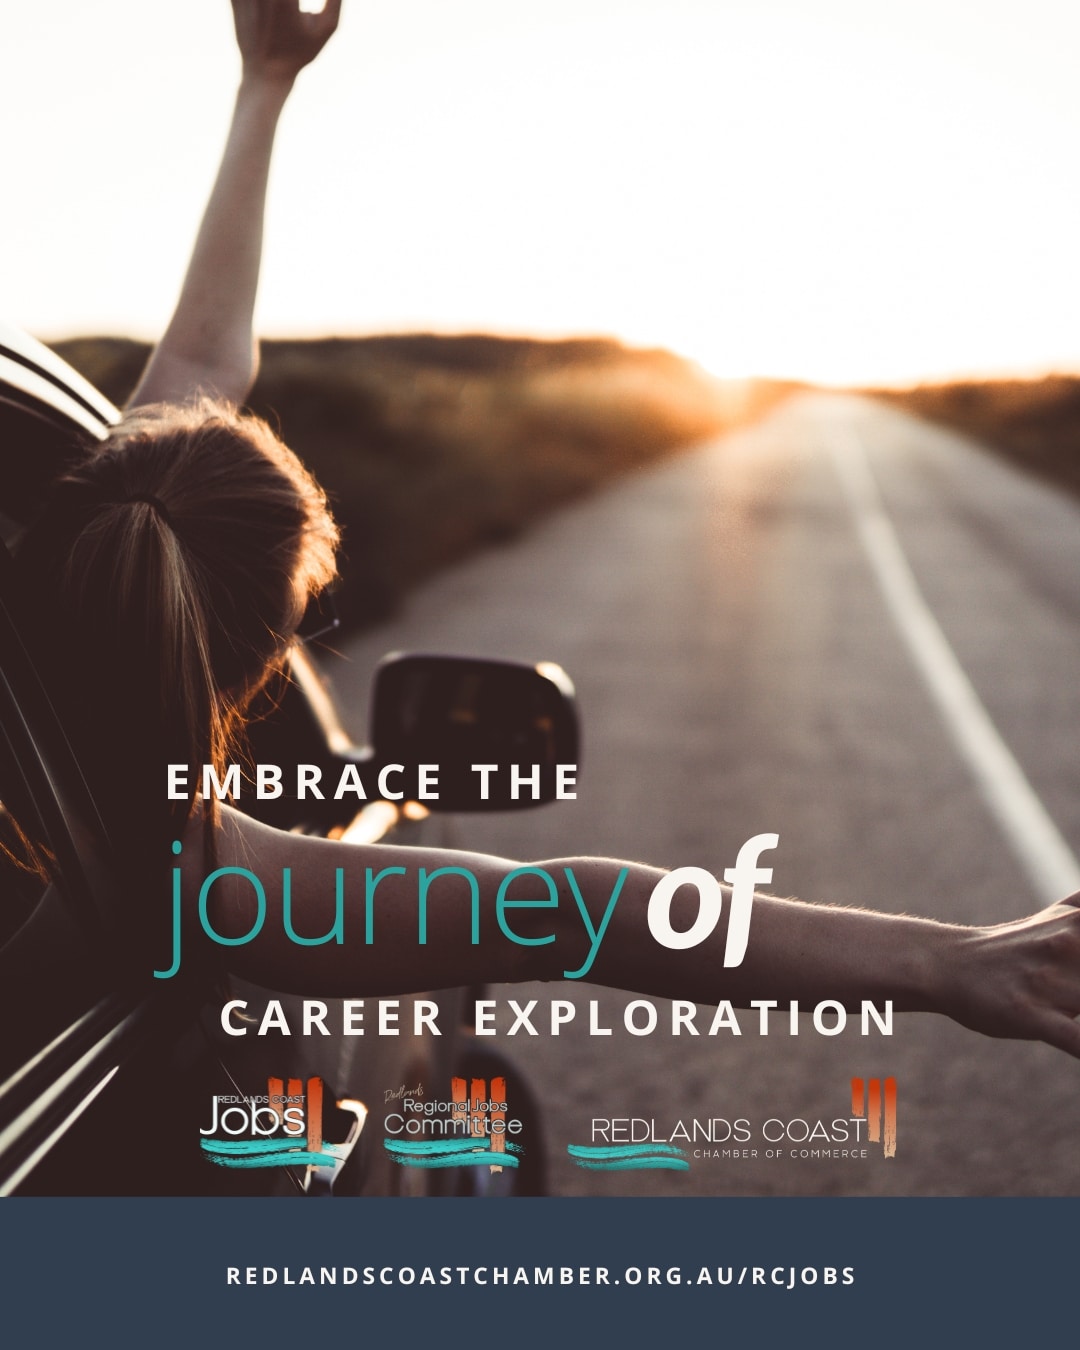 Embrace the journey of career exploration